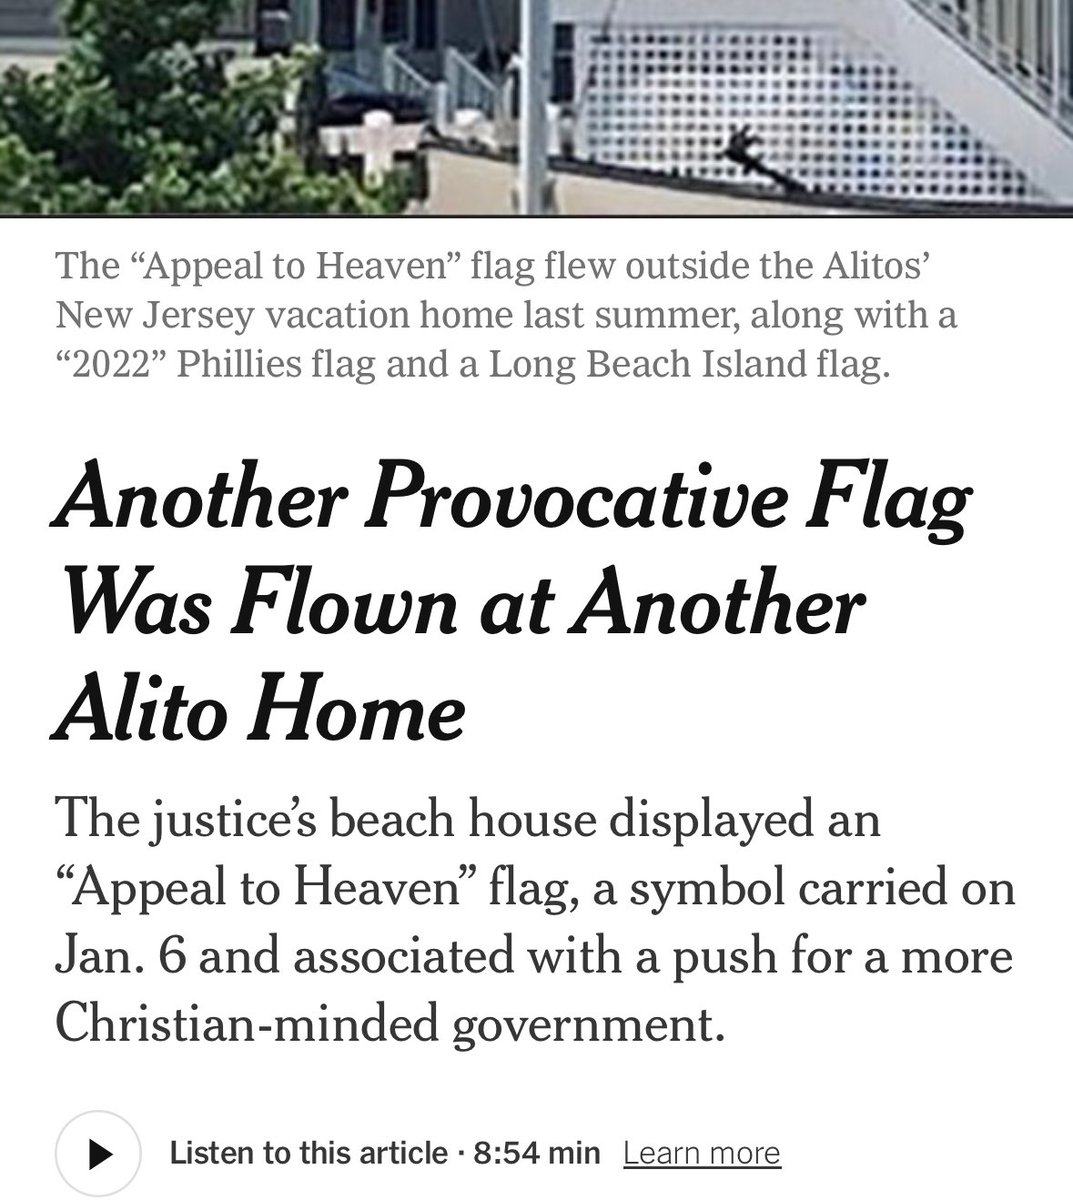 Either Alito’s wife gets into a lot of arguments with her neighbors or there’s a pattern here